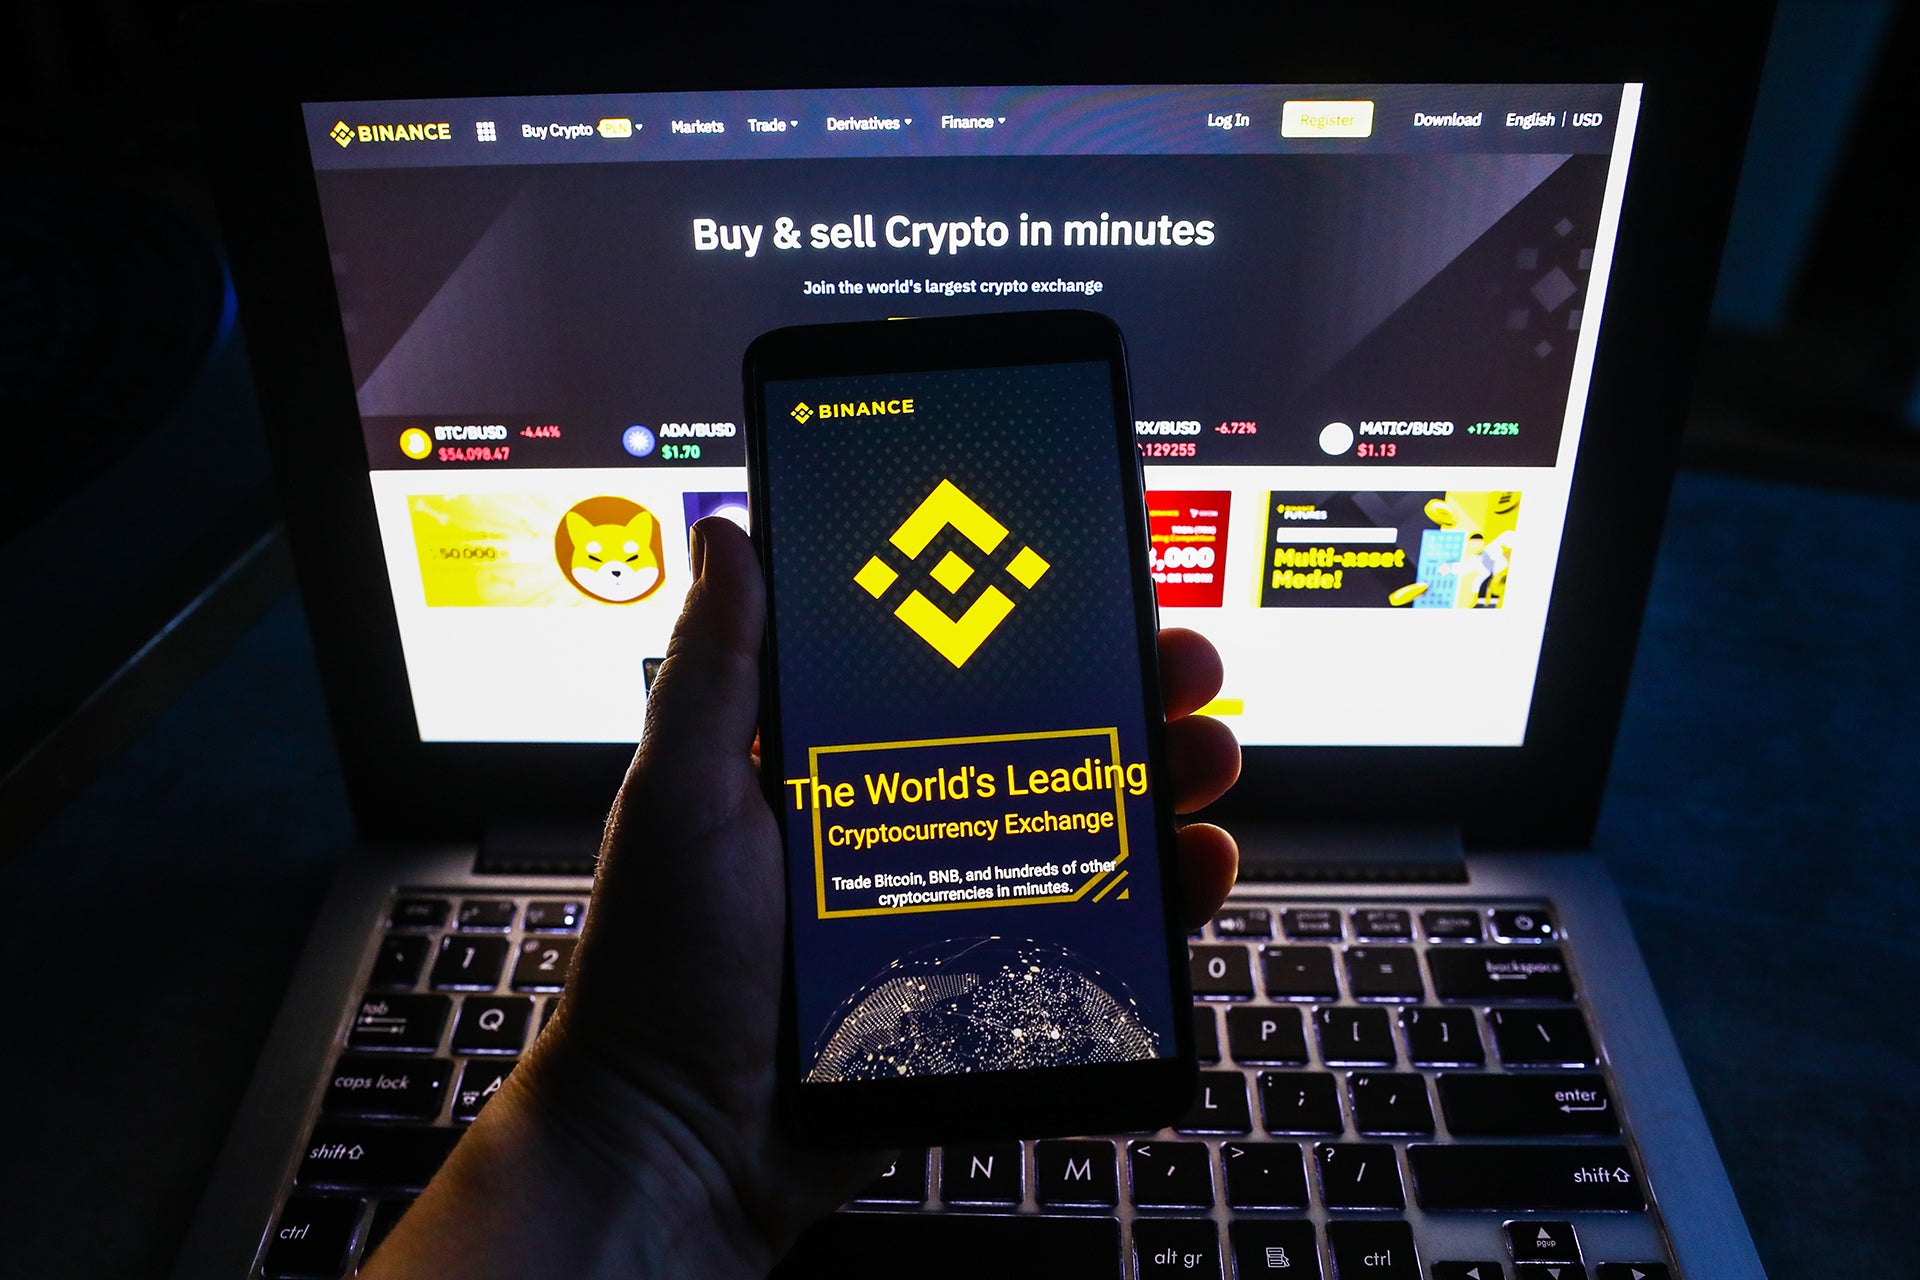 On and off again: Binance stops withdrawals and blames backlog